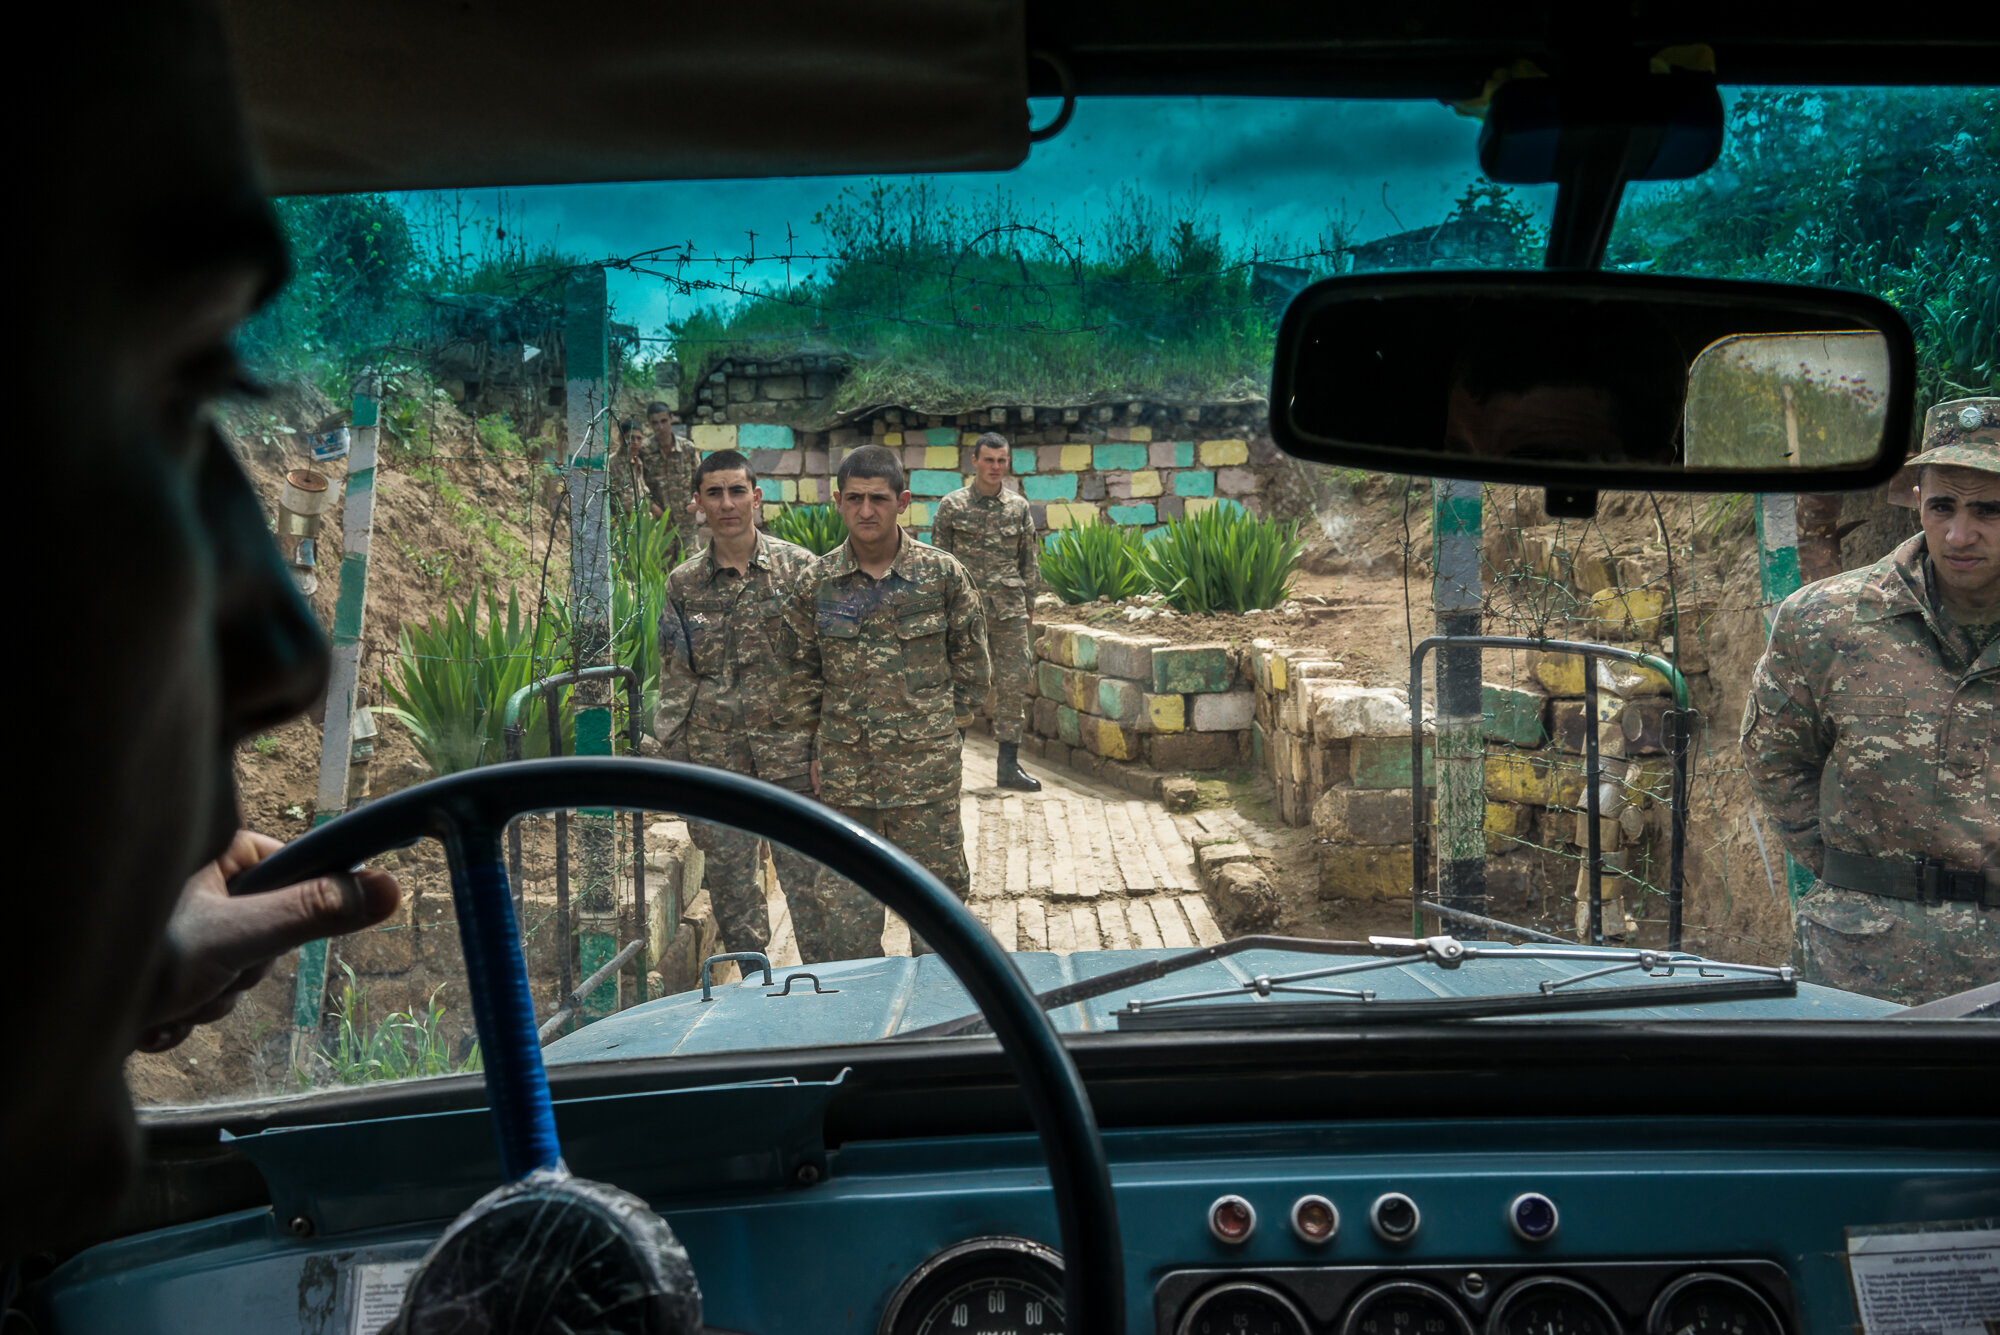  Members of the armed forces of Nagorno-Karabakh at their post along the line of contact with Azerbaijani forces in the eastern direction. Near Agdam, Nagorno-Karabakh. 2015. 